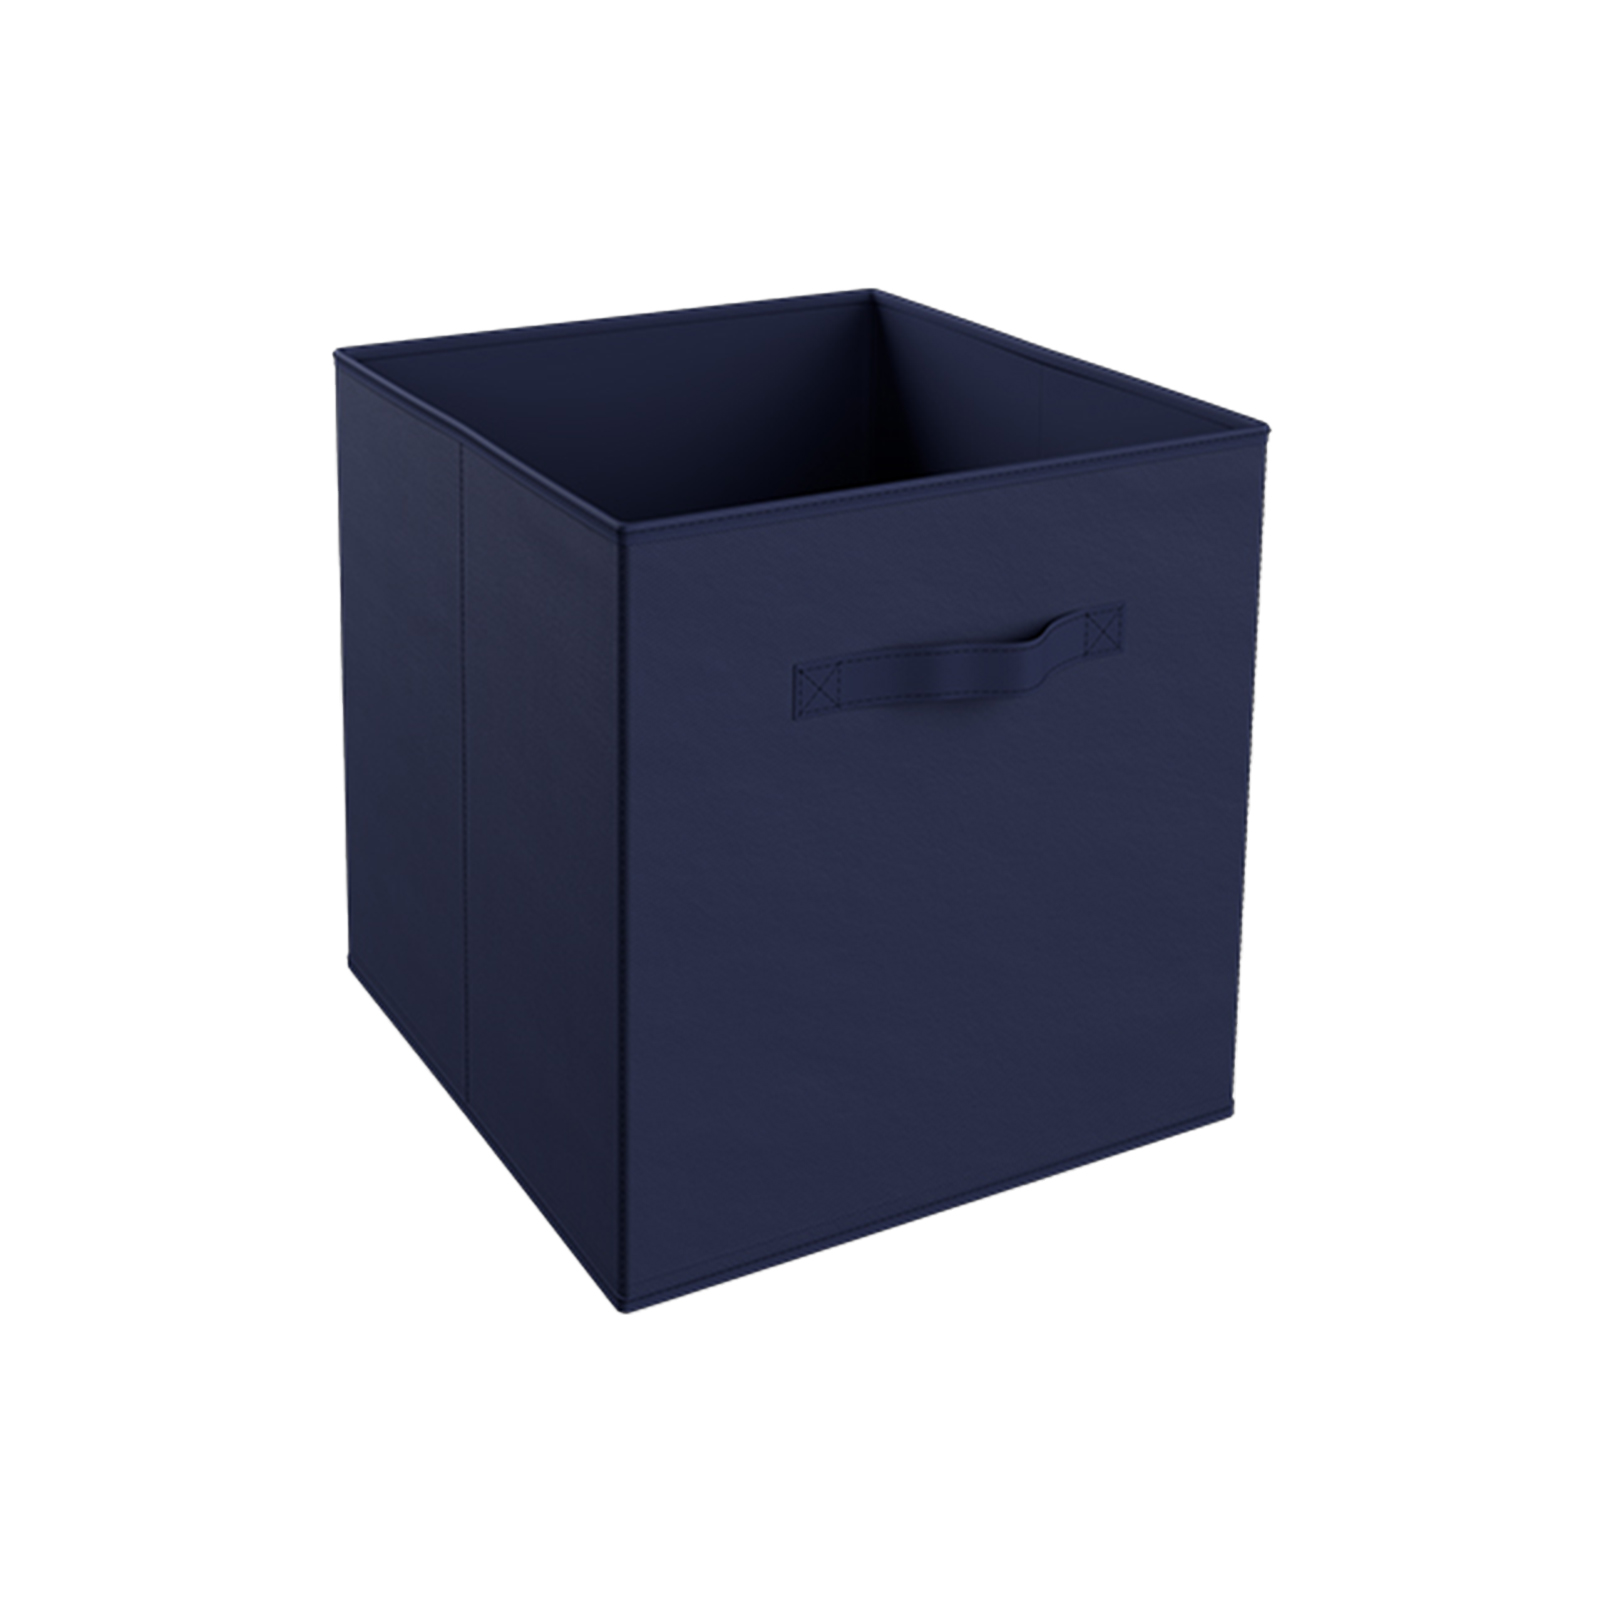 Clever Cube Compact Fabric Insert Navy Blue